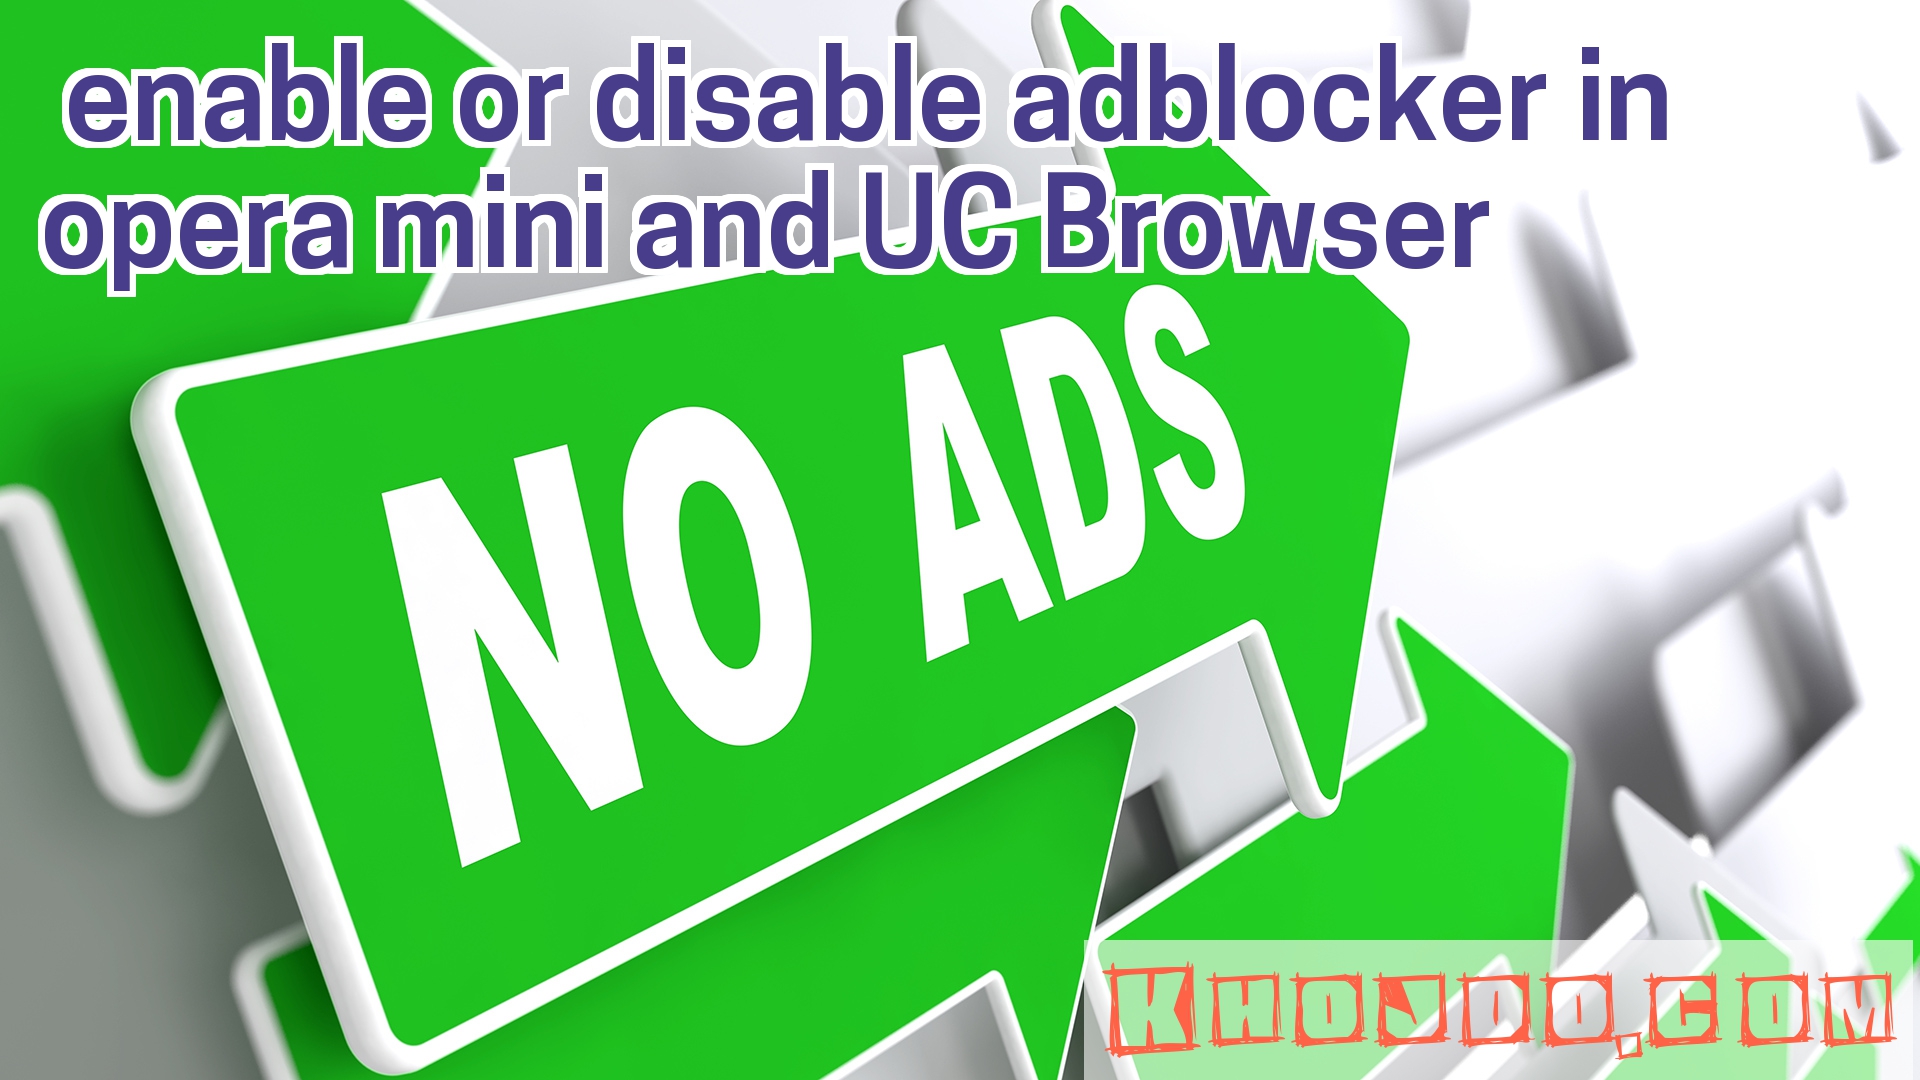 How to enable or disable adblocker visiblity in opera mini and UC mobile Browser uc browser adblocker on or off uc browser adblocker enable or disable 